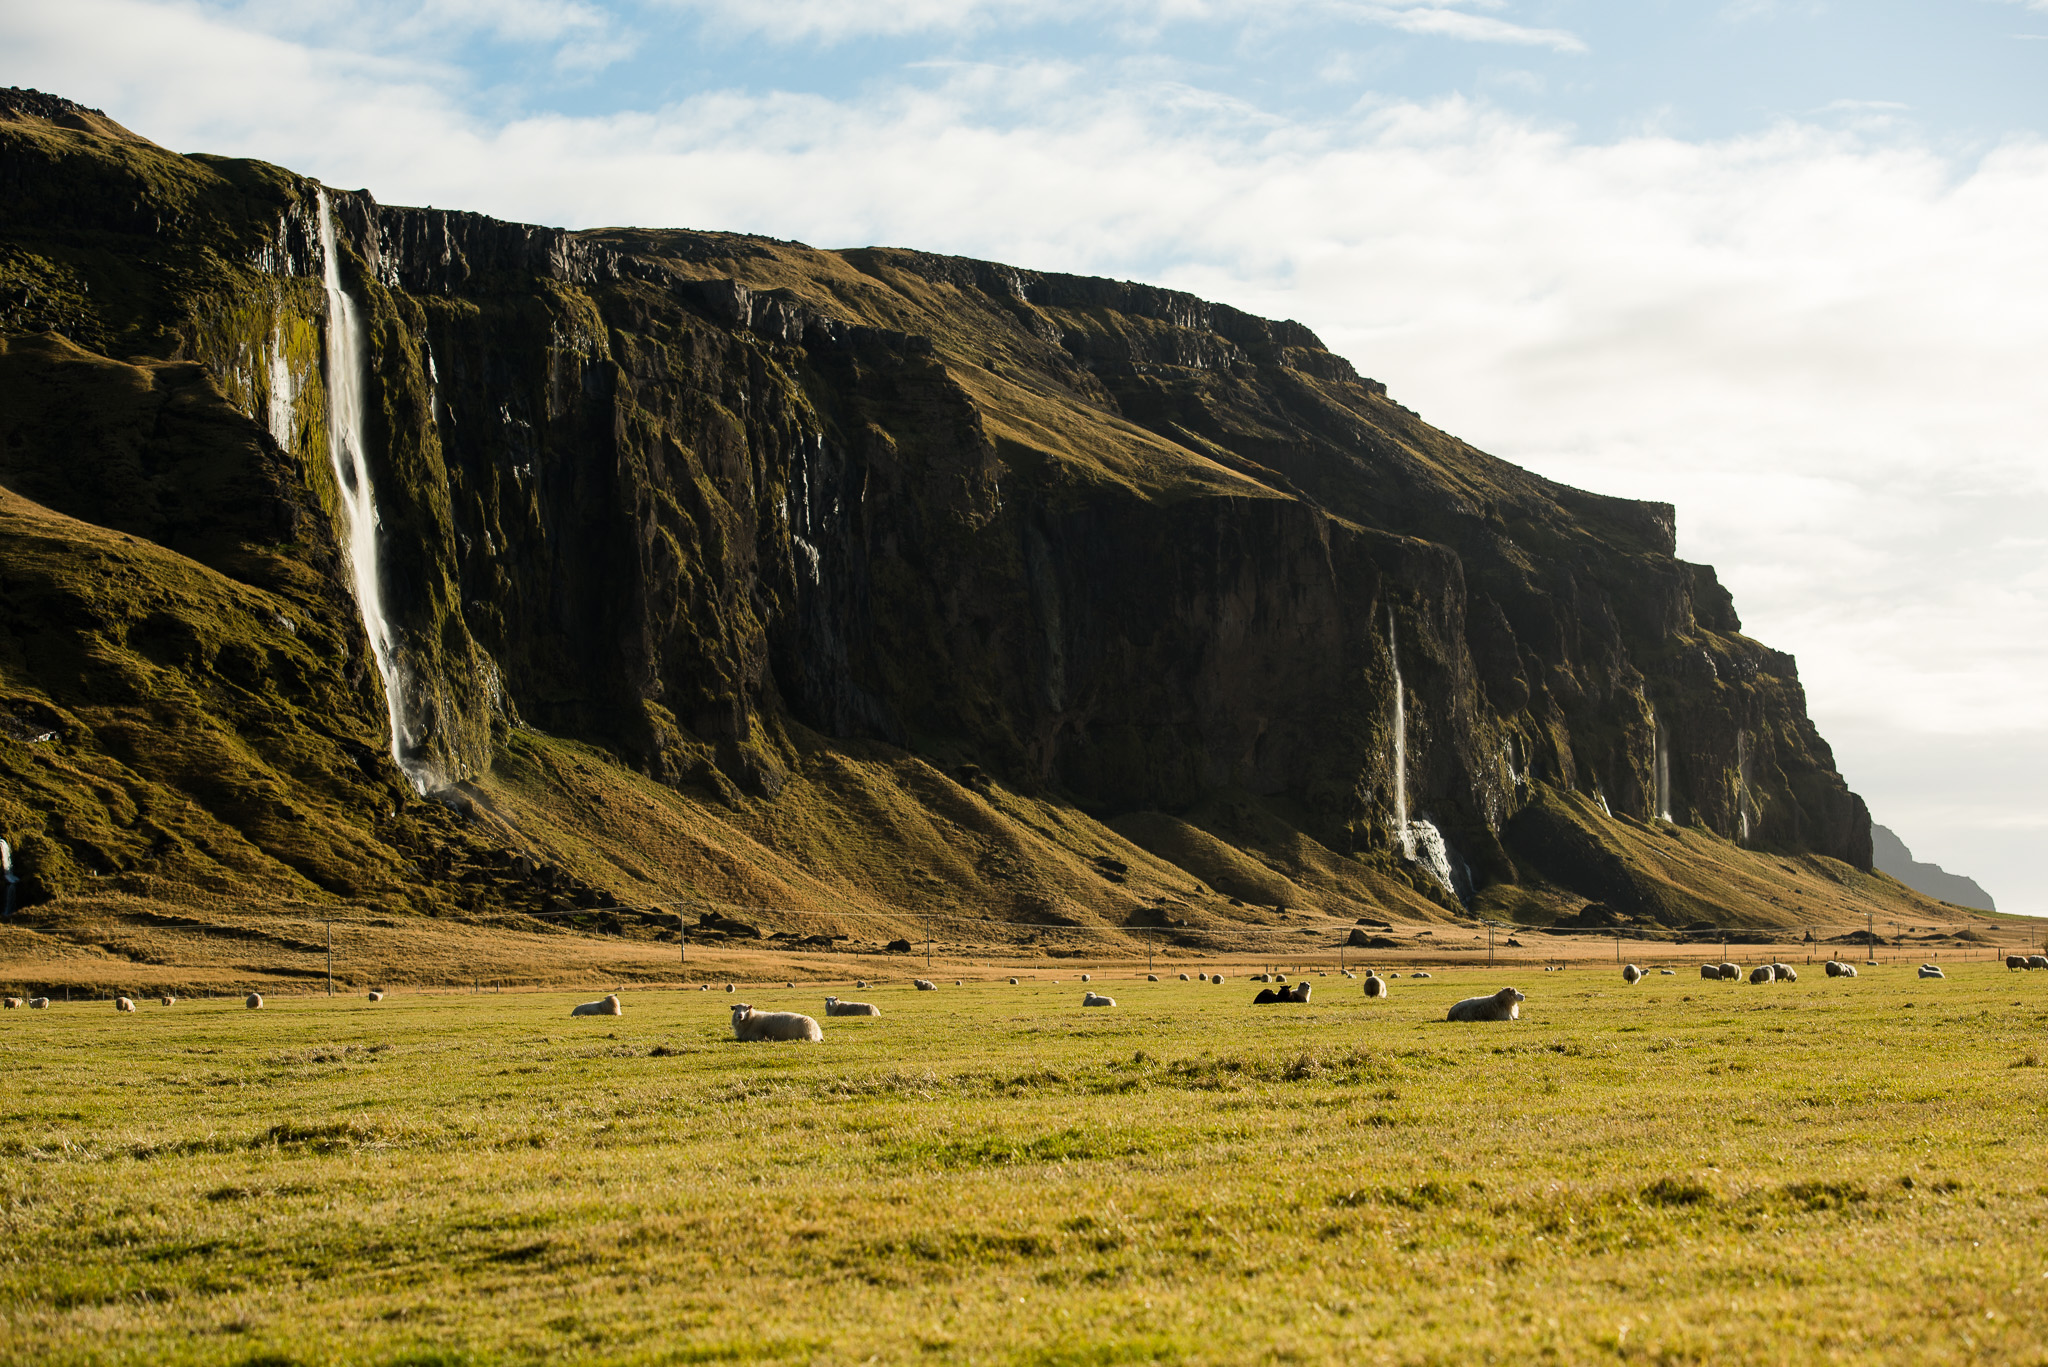 Iceland in a nutshell: sheep and waterfalls.